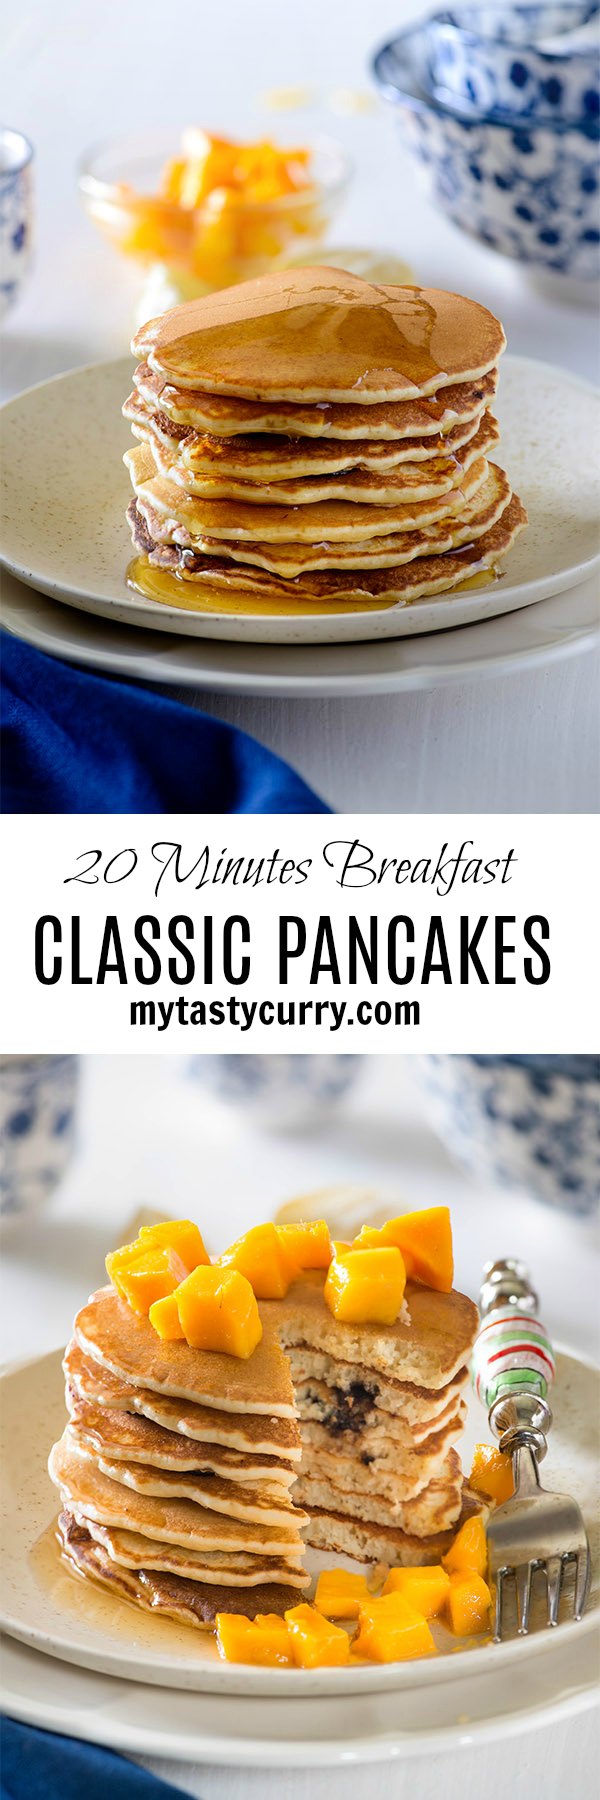 Fluffy pancake for breakfast in 20 minutes, an easy delicious homemade fluffy pancake recipe made with simple ingredients. Almost fail proof recipe of pancakes that gives perfect stack of pancakes if you follow the exact proportions of ingredients.